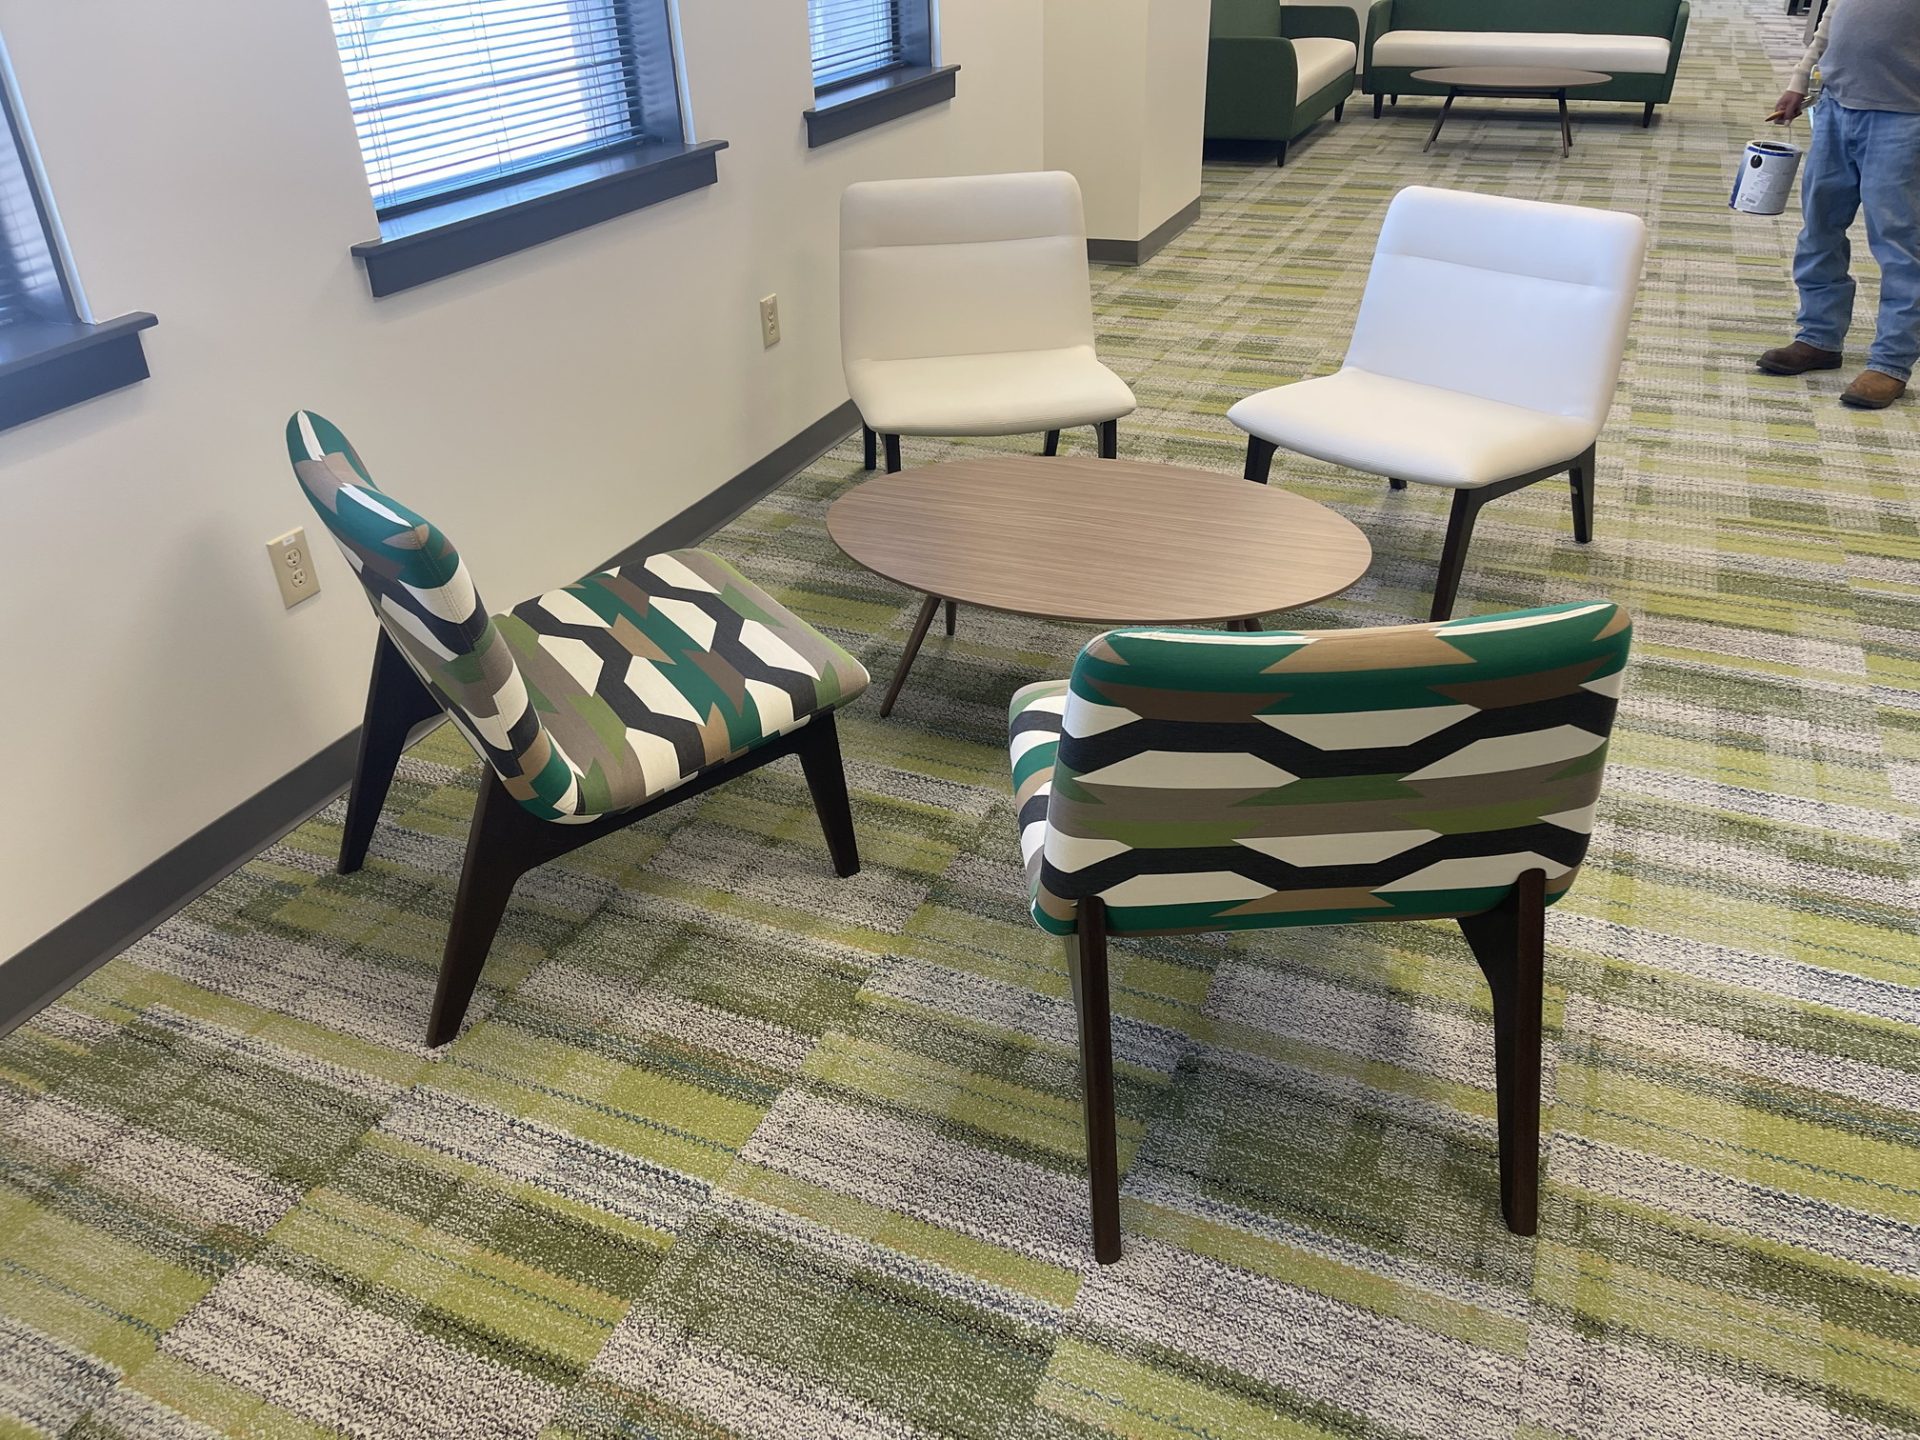 A round table with green and white chairs